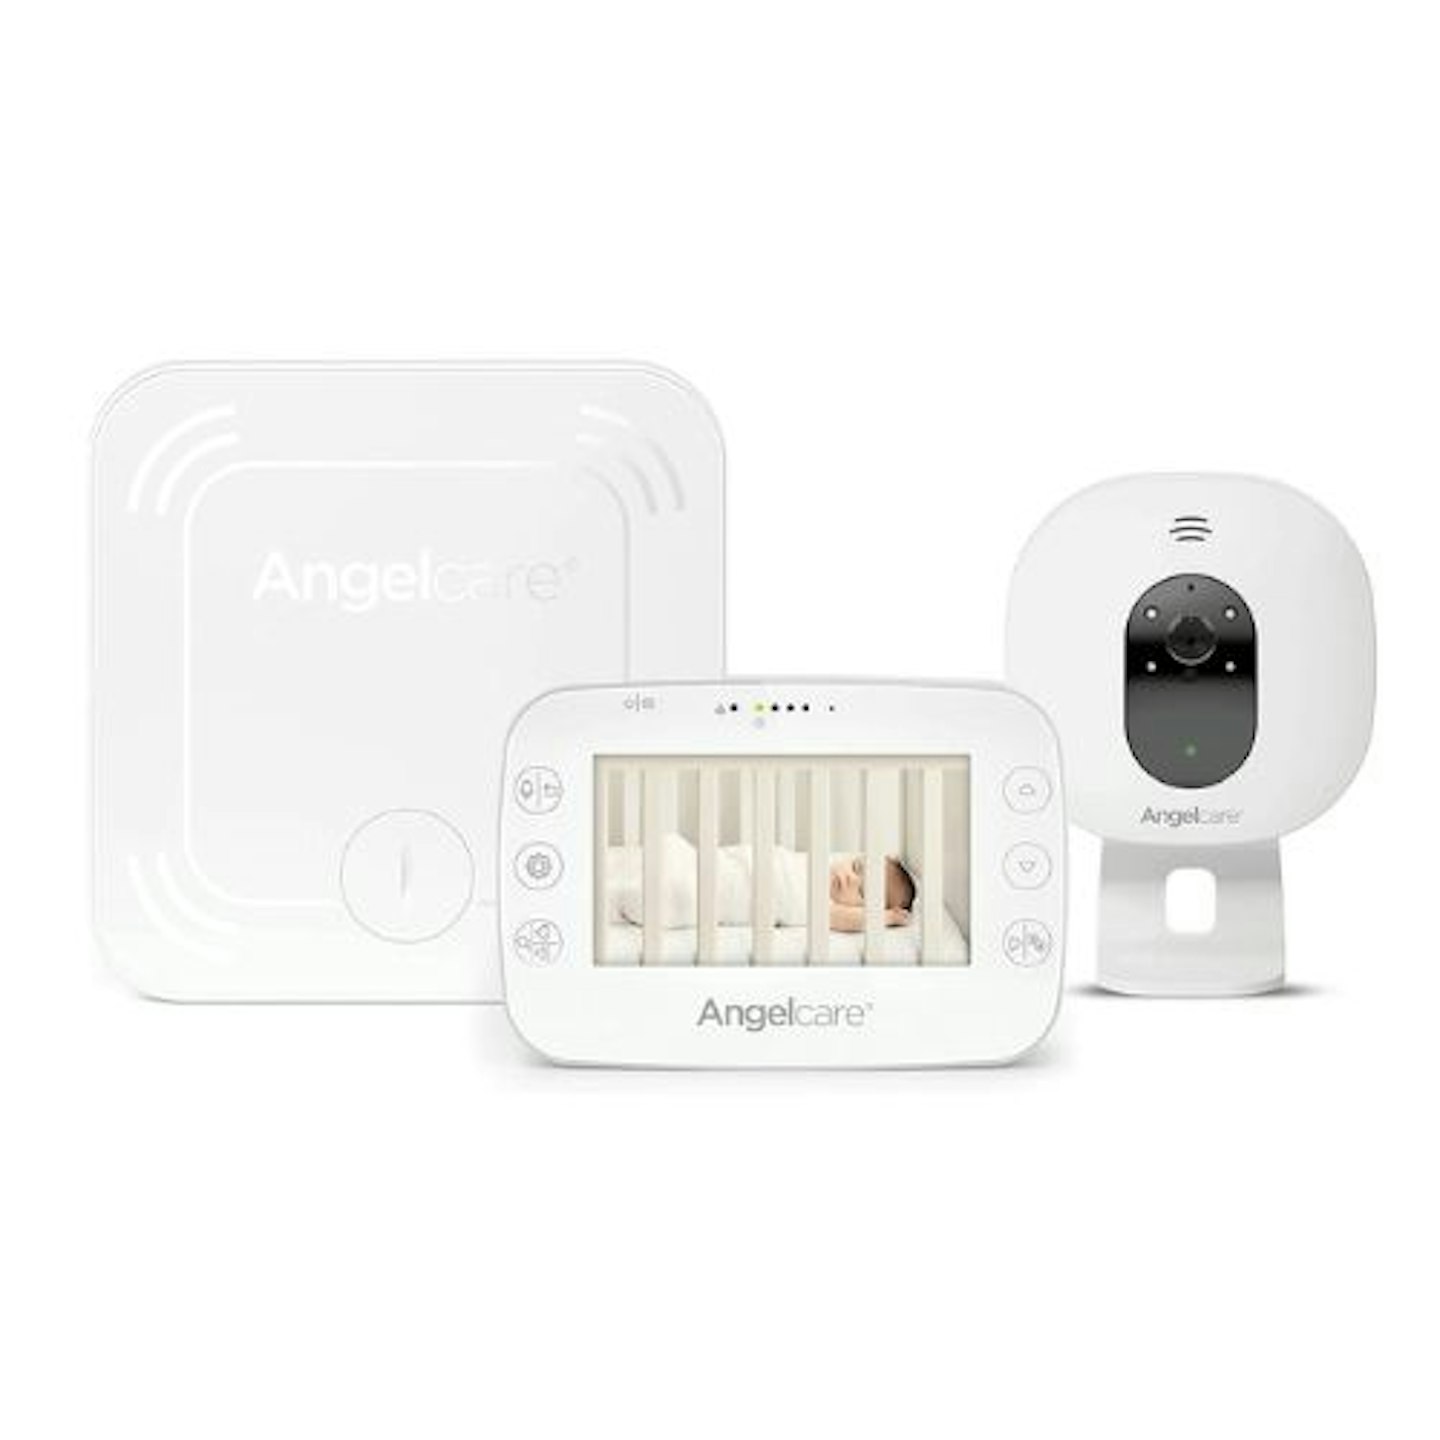 Angelcare Ac327 3-in-1 Baby Movement Monitor with Video